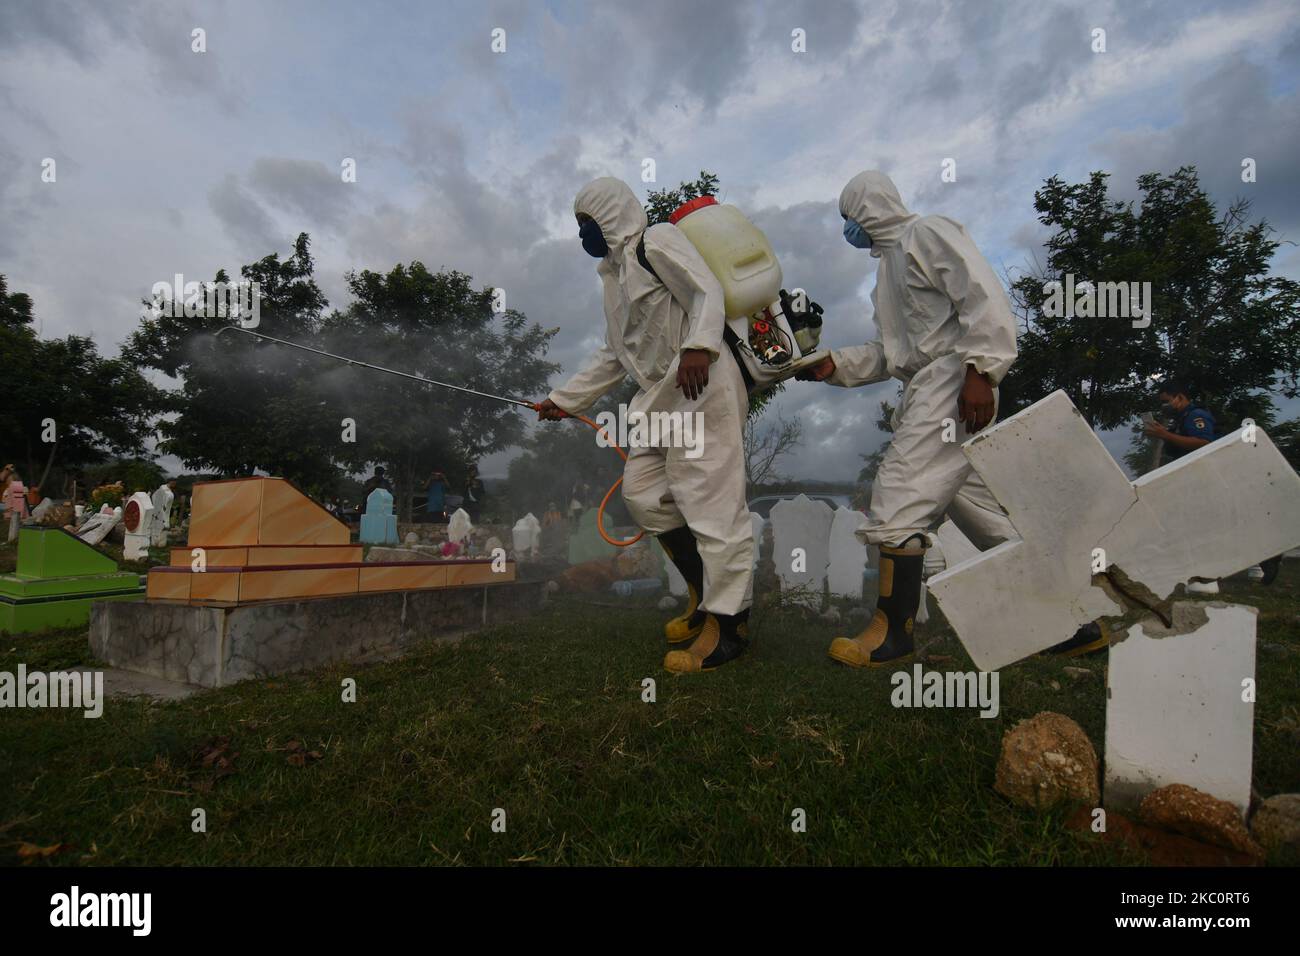 Officers spray disinfectant liquid to prevent the spread of COVID-19 in a burial area that is crowded with pilgrims, in Palu, Central Sulawesi Province, Indonesia, on September 28, 2020. Based on data from the Indonesian government until September 28, 2020 the number of people who were confirmed positive for COVID-19 in Indonesia reached 278,722 people and 206,870 people were declared cured and 10,473 people died. (Photo by Mohamad Hamzah/NurPhoto) Stock Photo